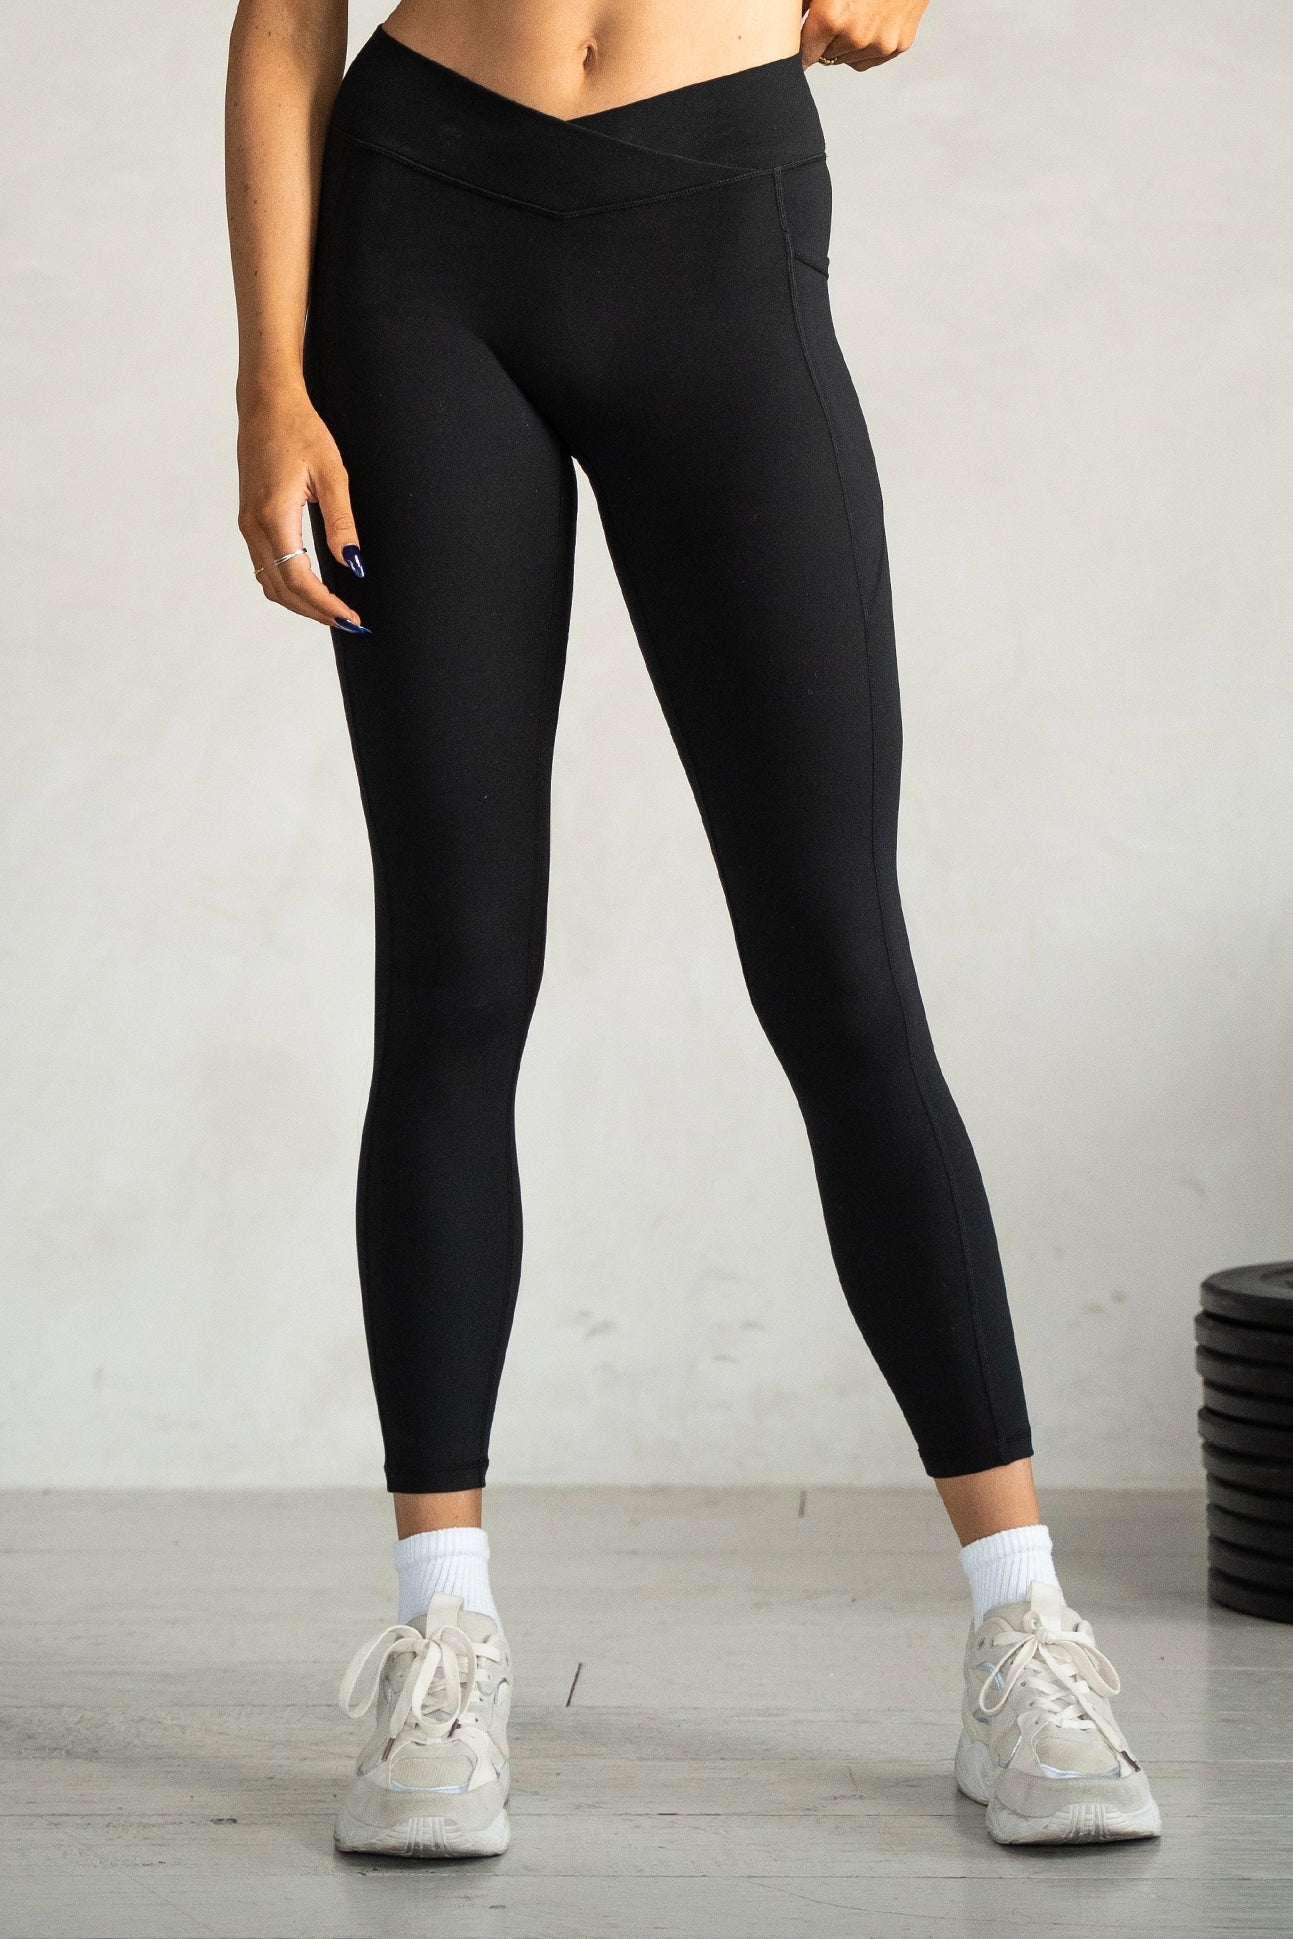 Ootd! Power pivot tank in black size 6. Align leggings cross waist in pink  taupe? Size 6. The leggings go ridiculously high up!! Going to pair with a  black align jacket. : r/lululemon